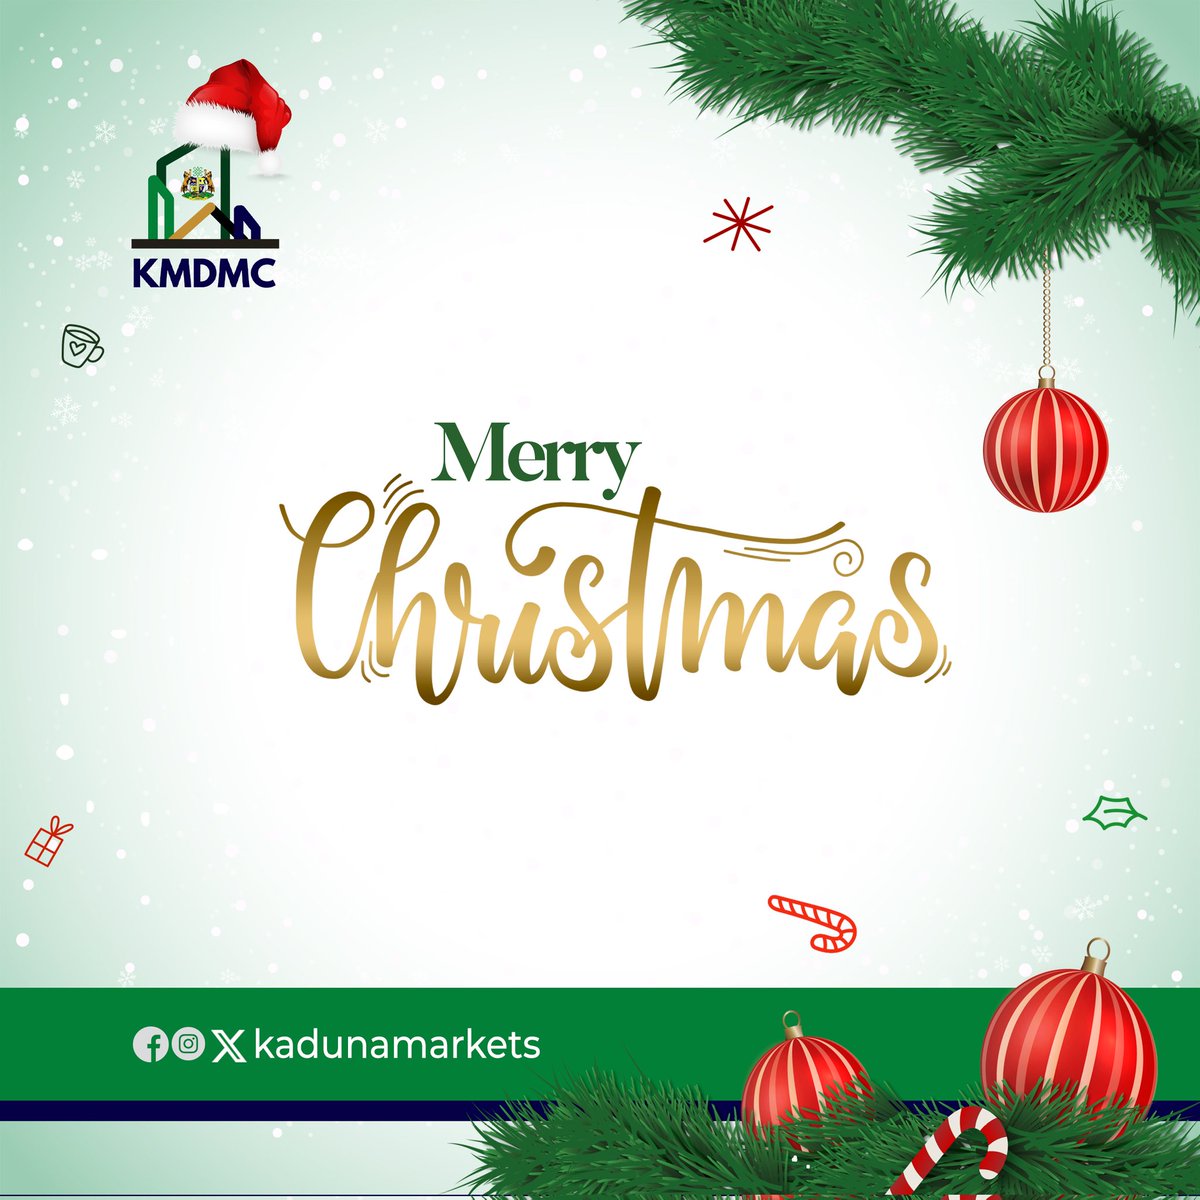 Wishing you a season filled with success and joy. Merry Christmas from the KMDMC team.